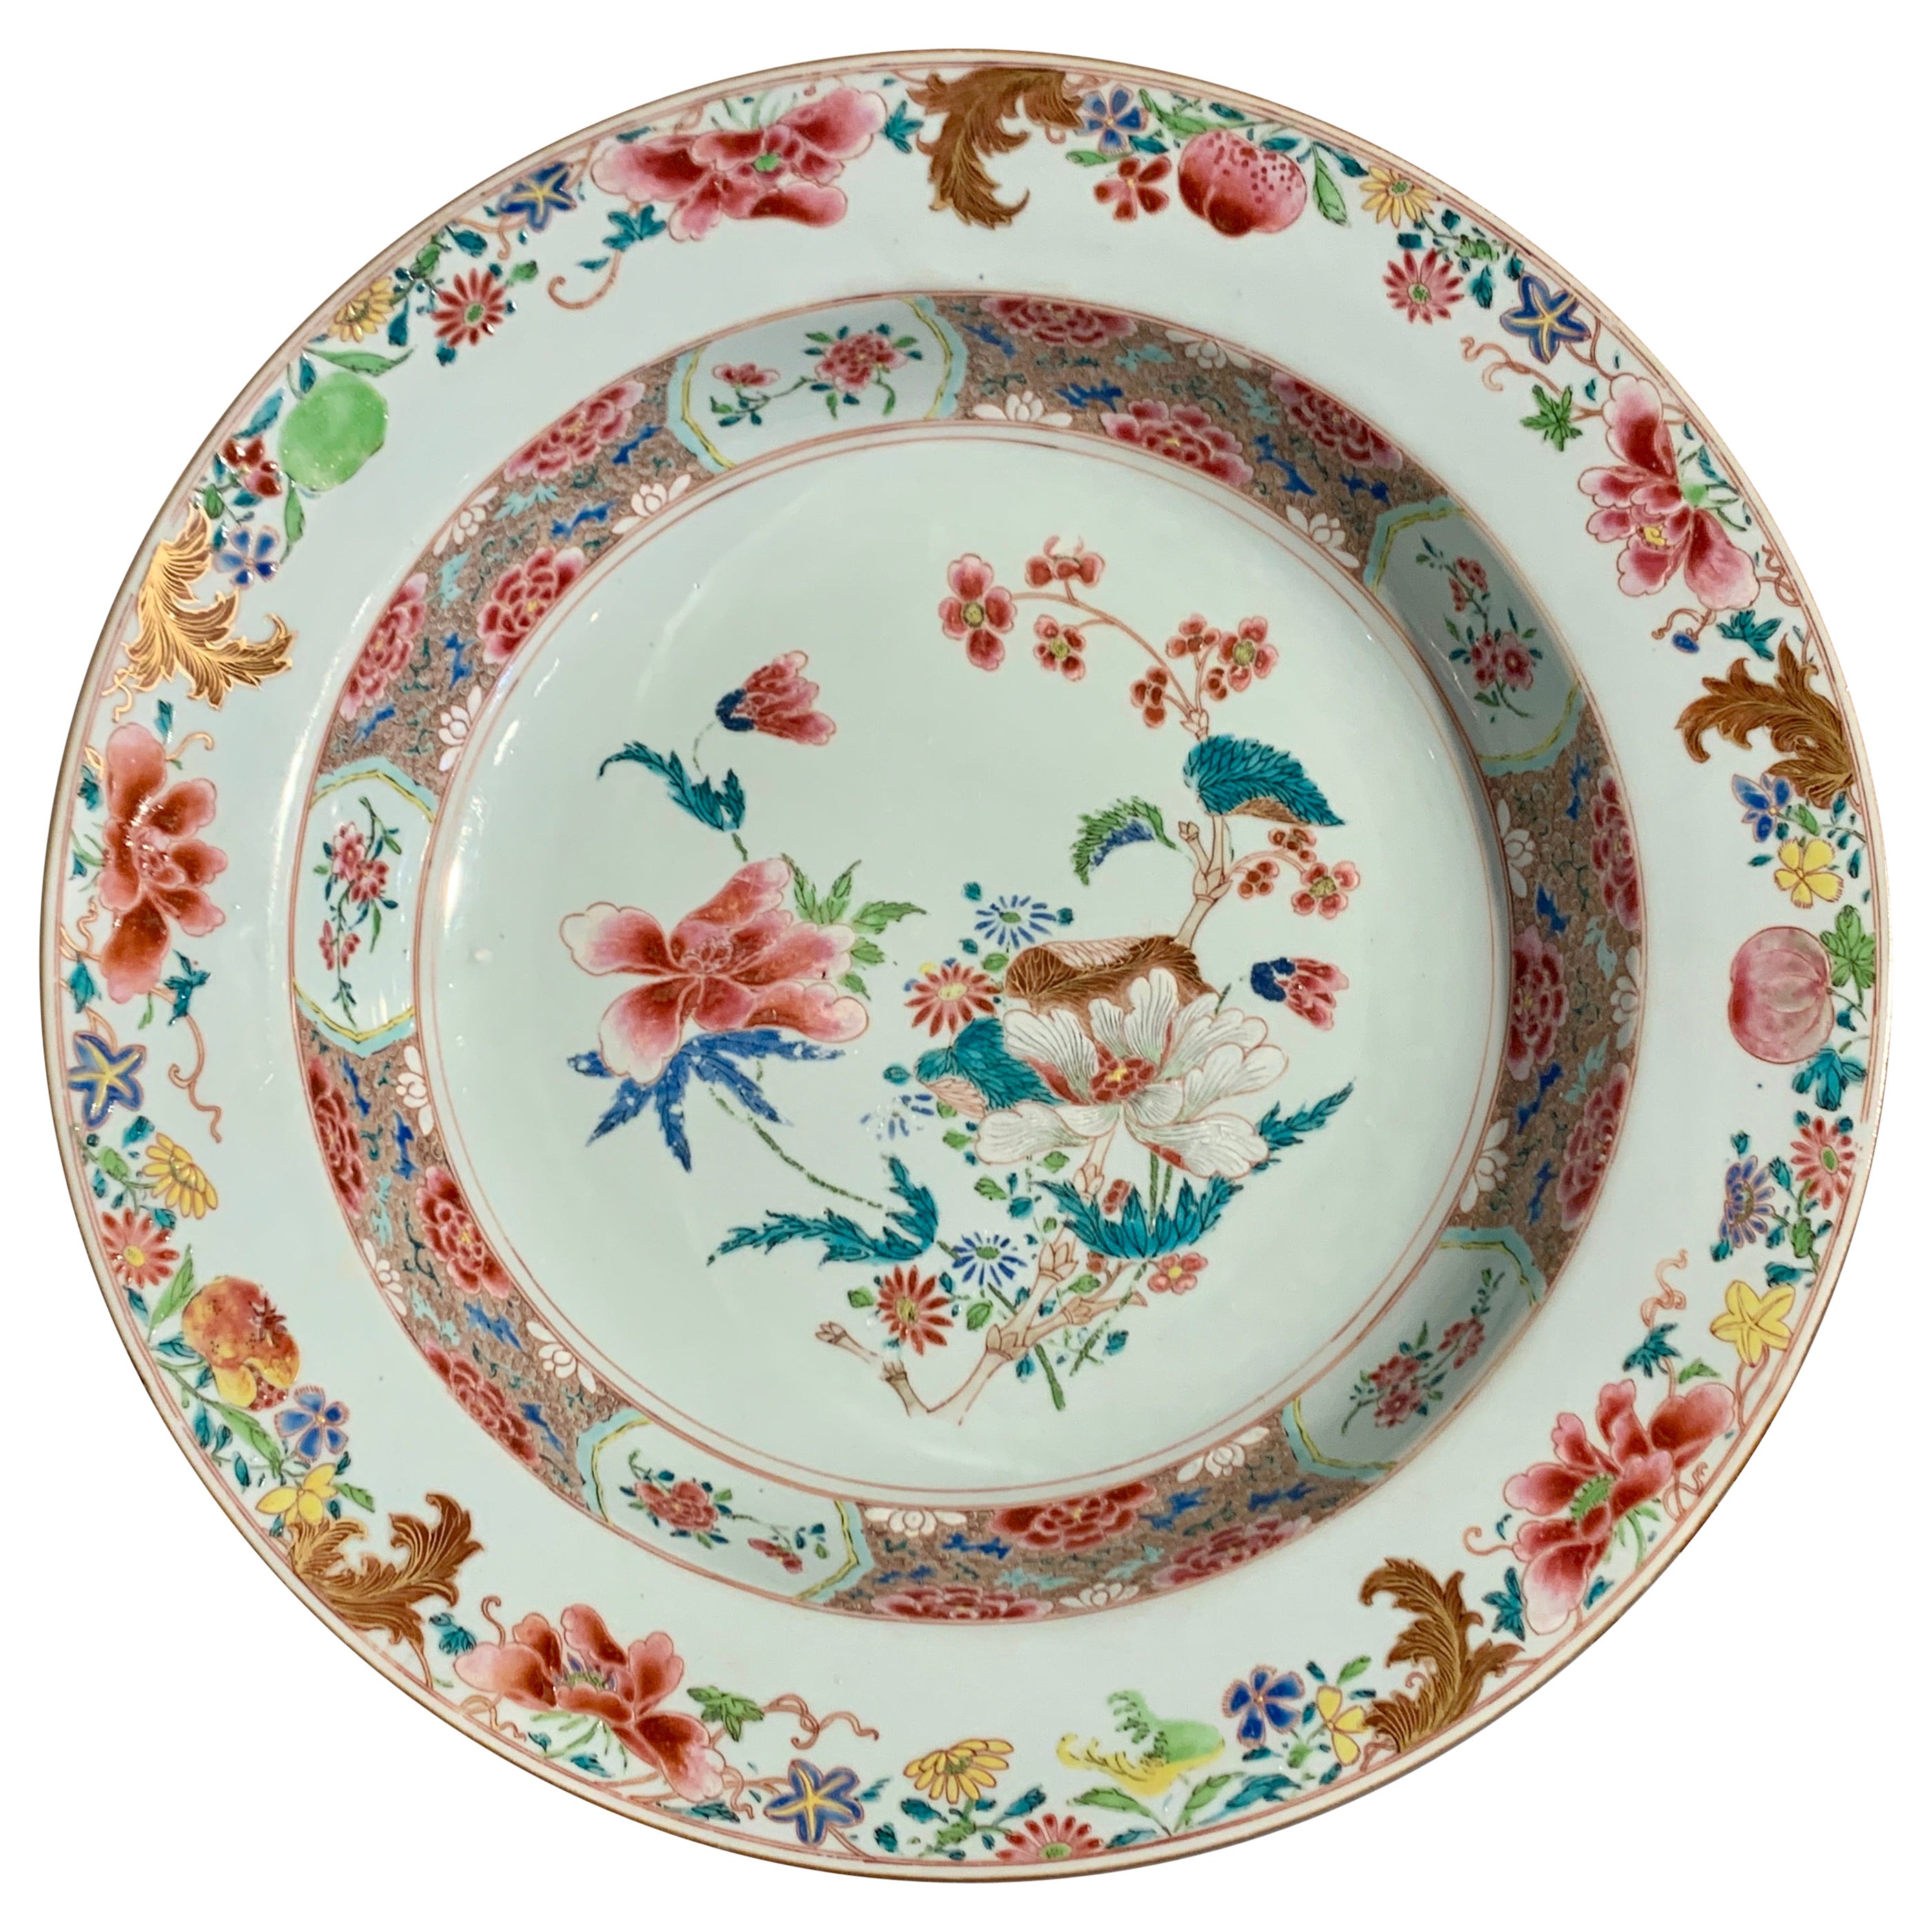 Chinese Export Porcelain Famille Rose Large Deep Dish, 18th Century, China